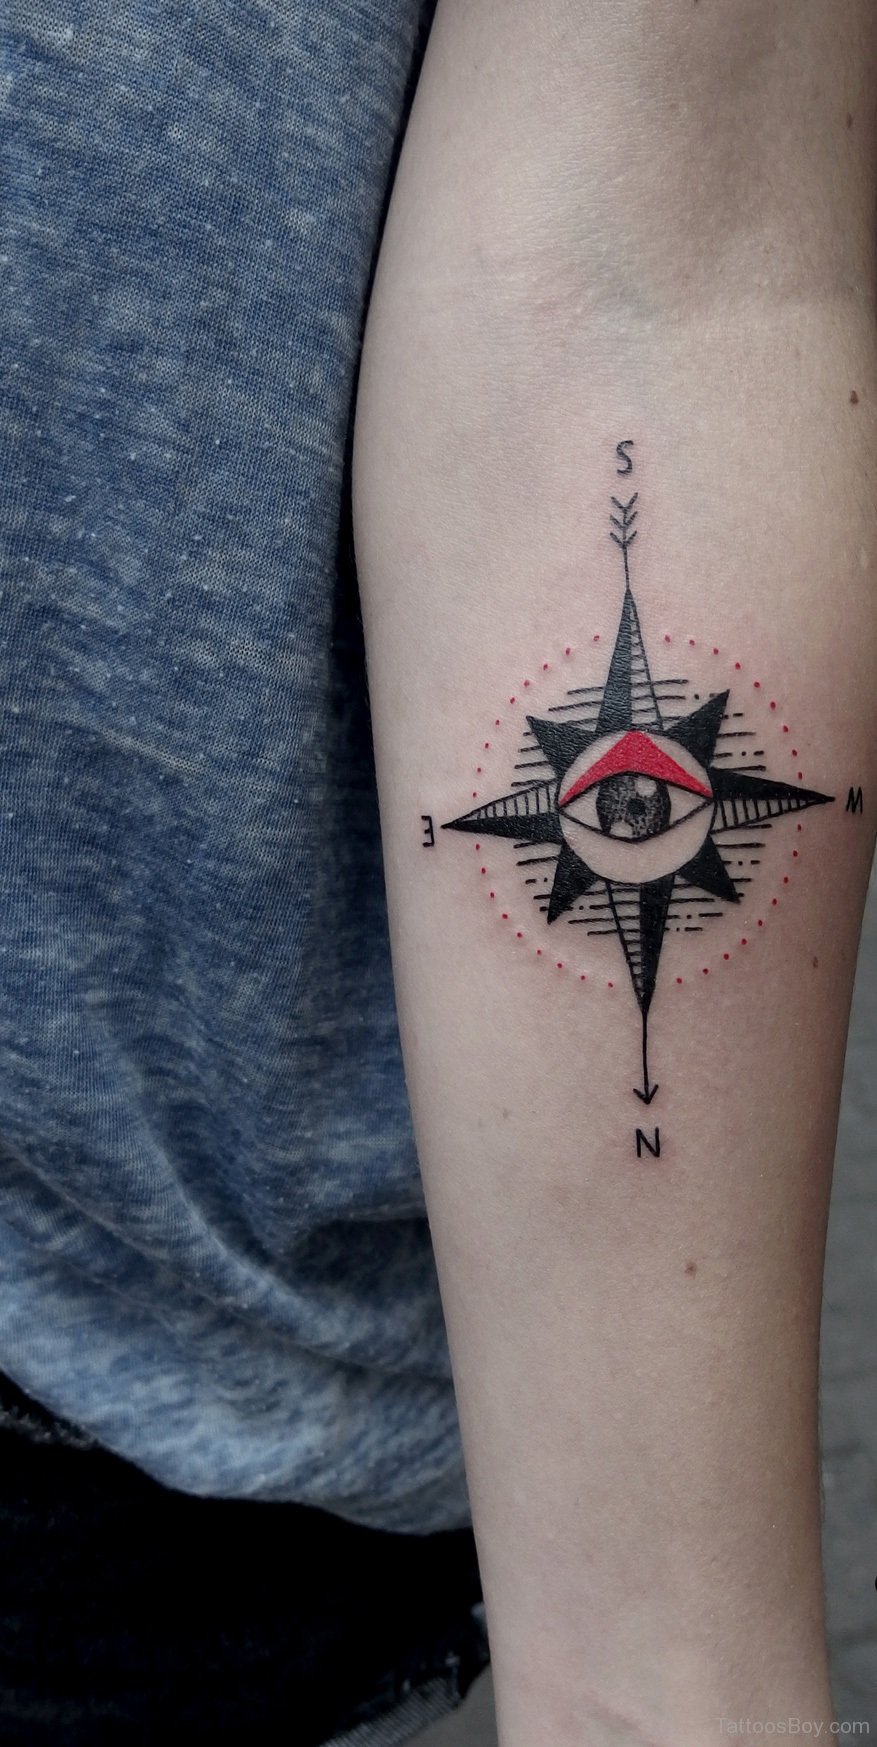 Naksh Tattoos - Compass tattoos originated as a common ink choice for  fishermen and sailors, as they believed the designs would bring them good  fortune during their travels and would always guide